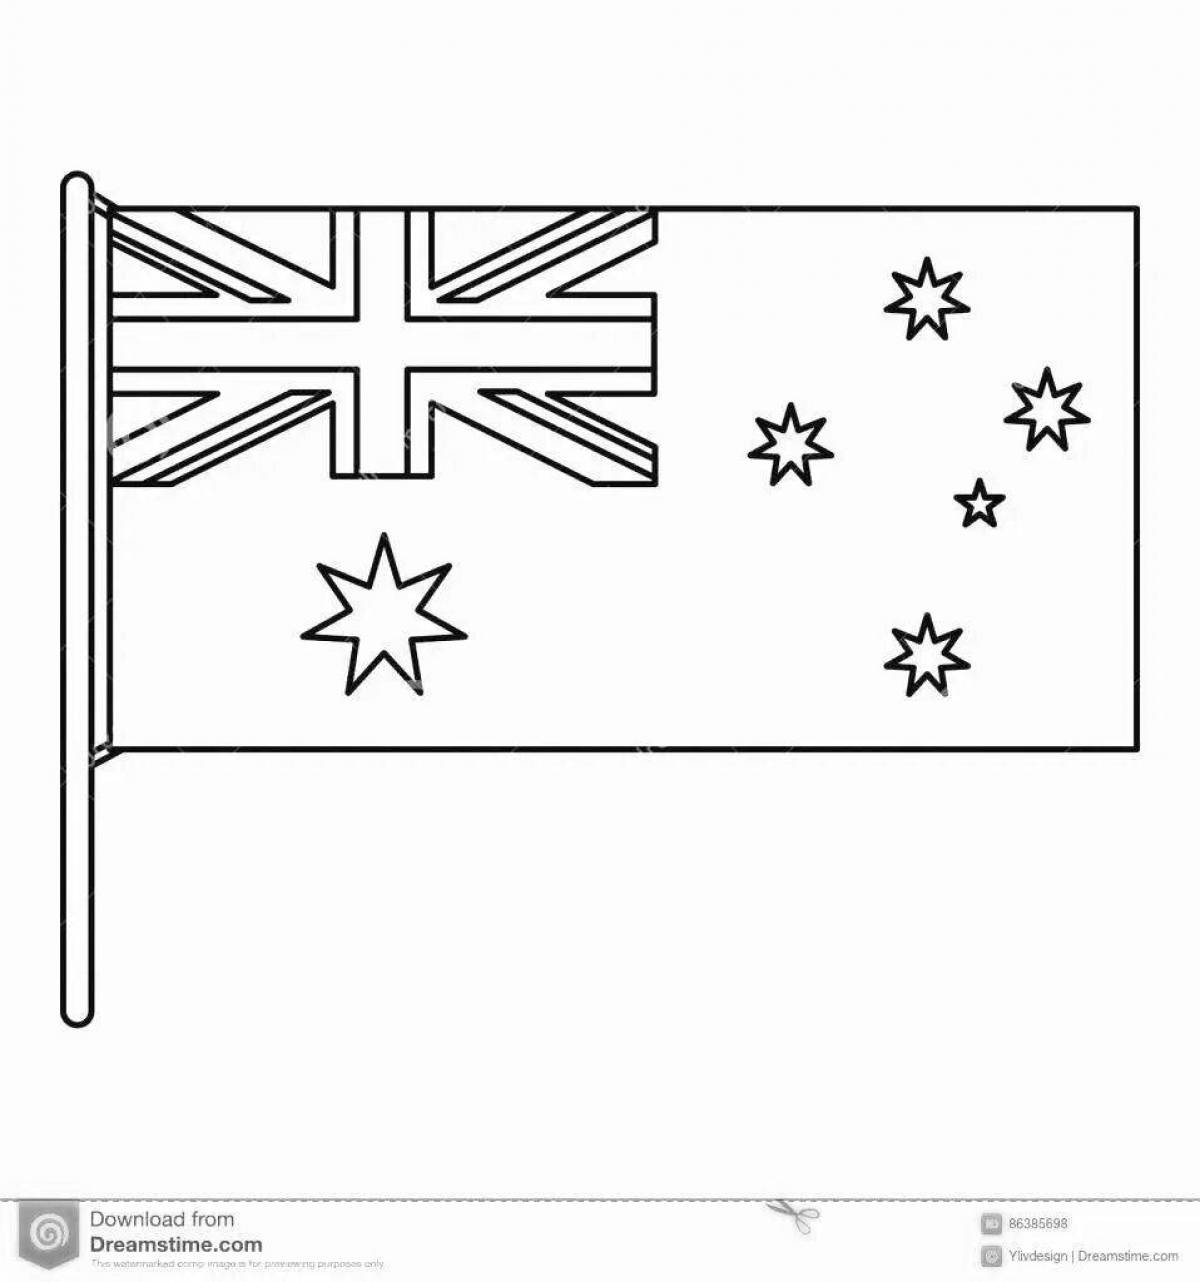 Australian royal coat of arms coloring page